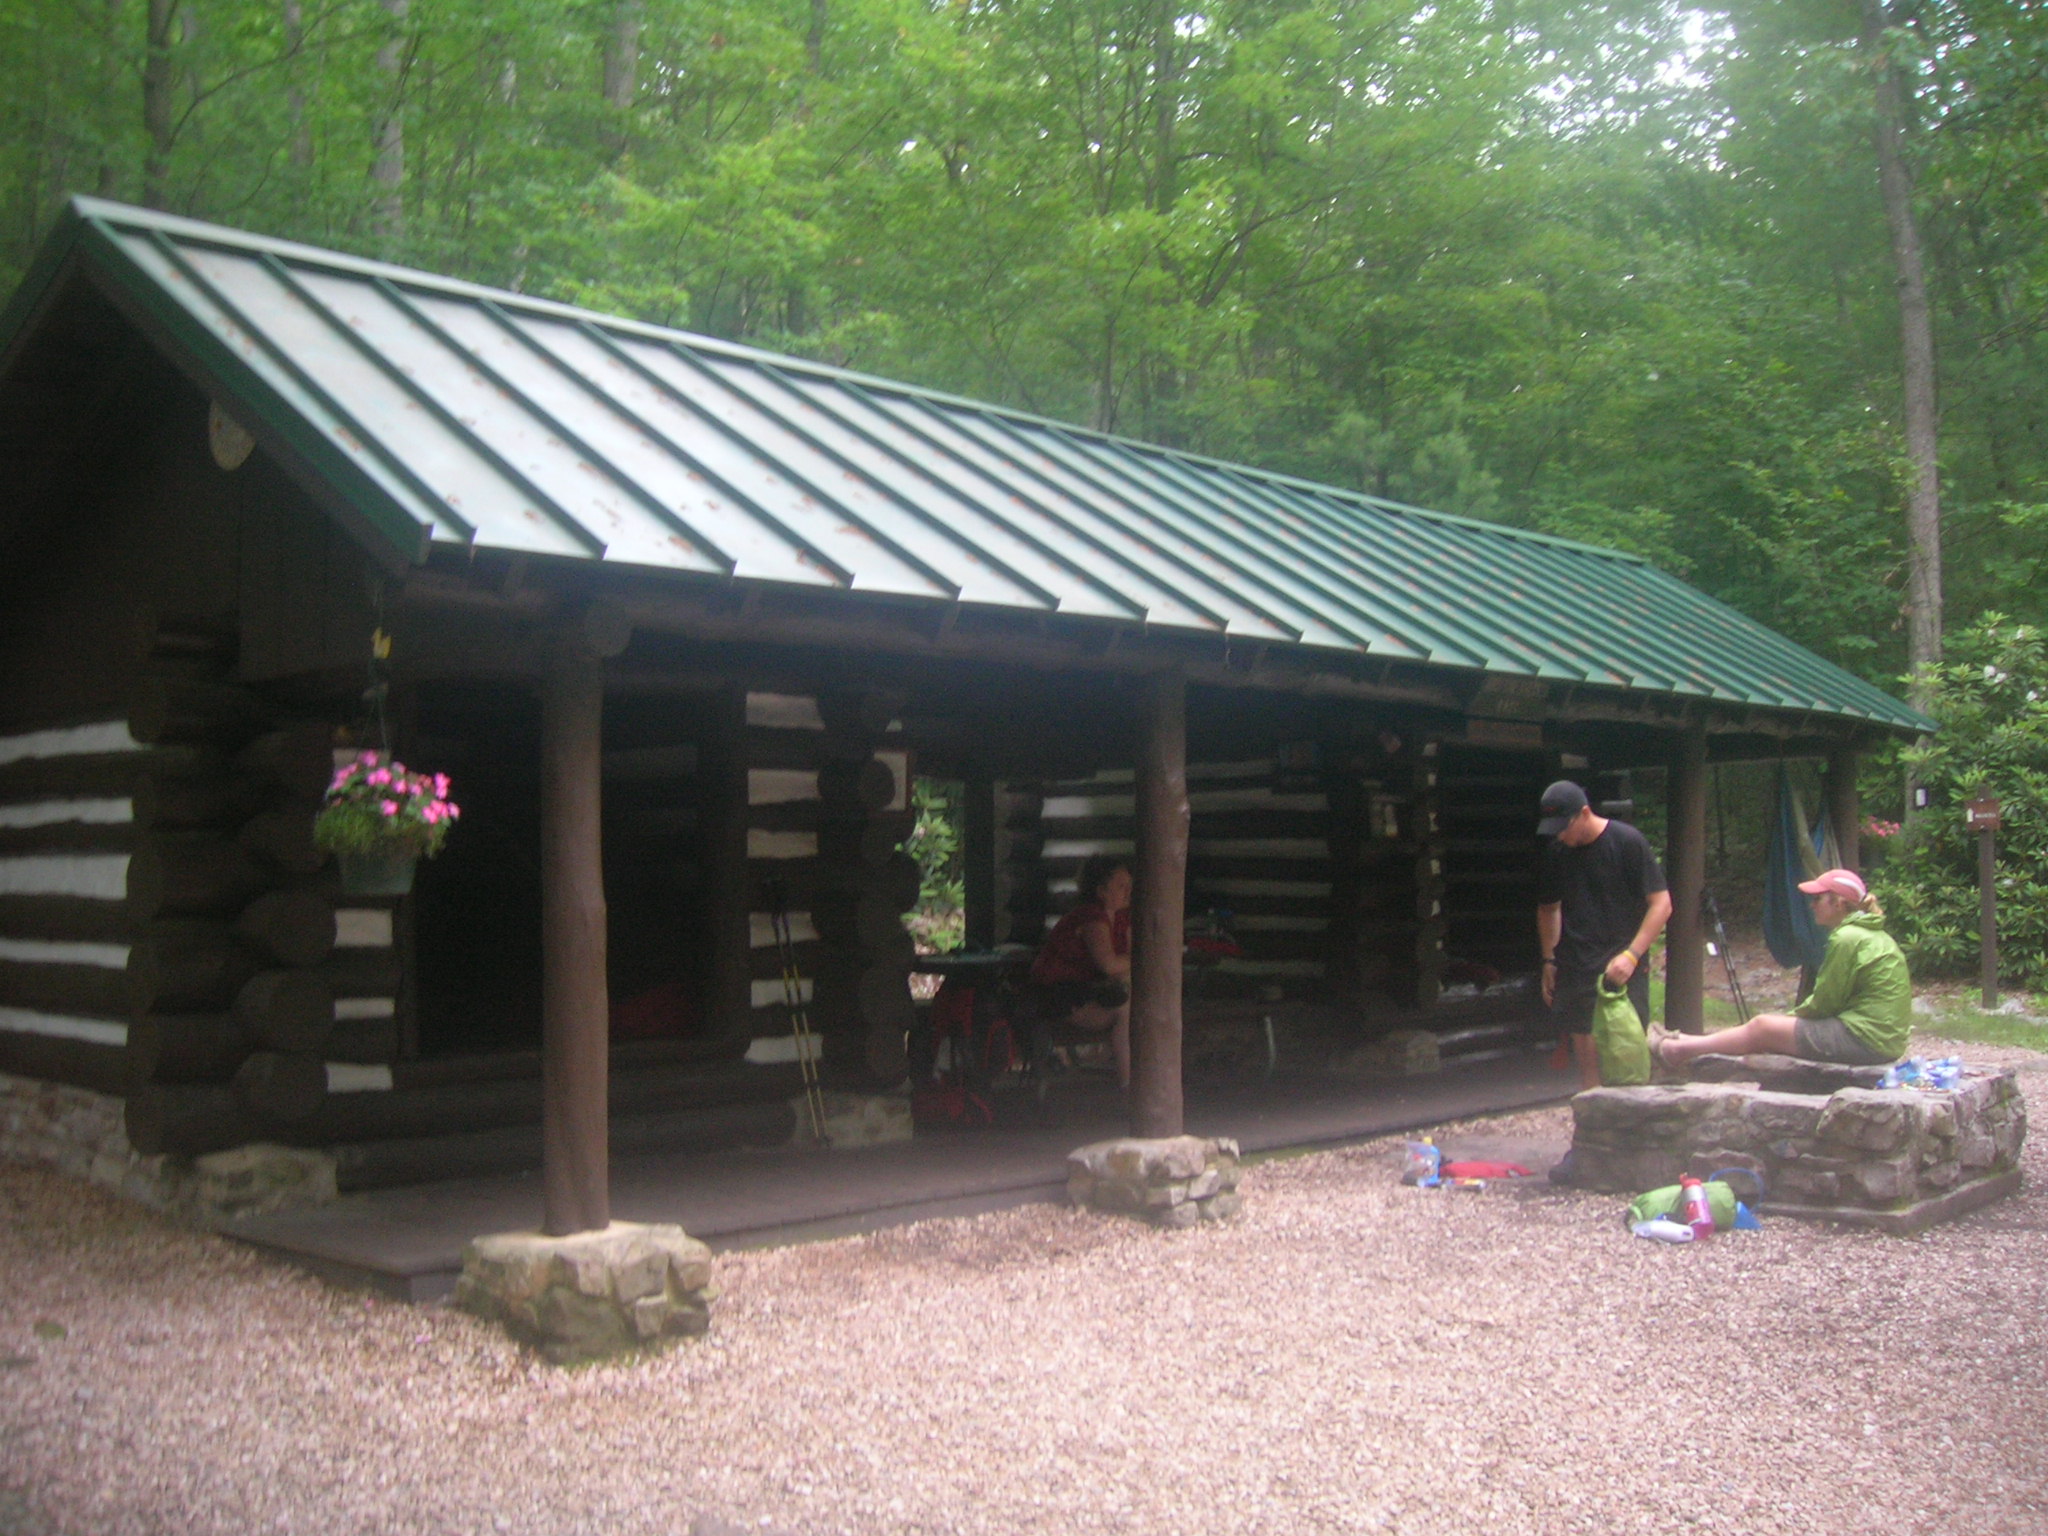 Log cabin with new roof